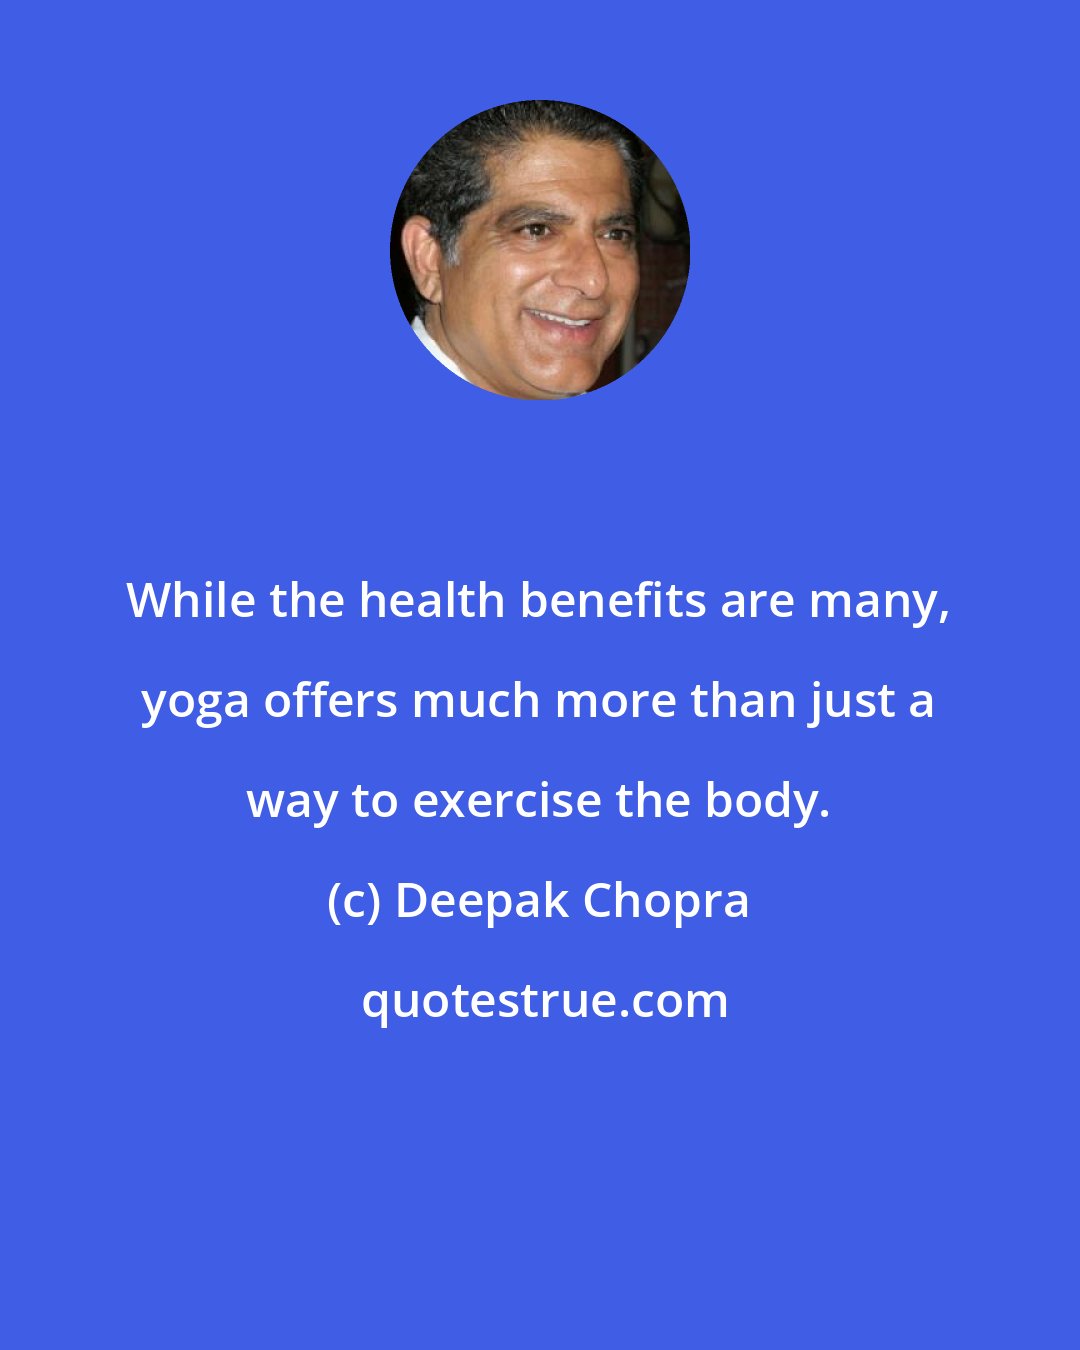 Deepak Chopra: While the health benefits are many, yoga offers much more than just a way to exercise the body.